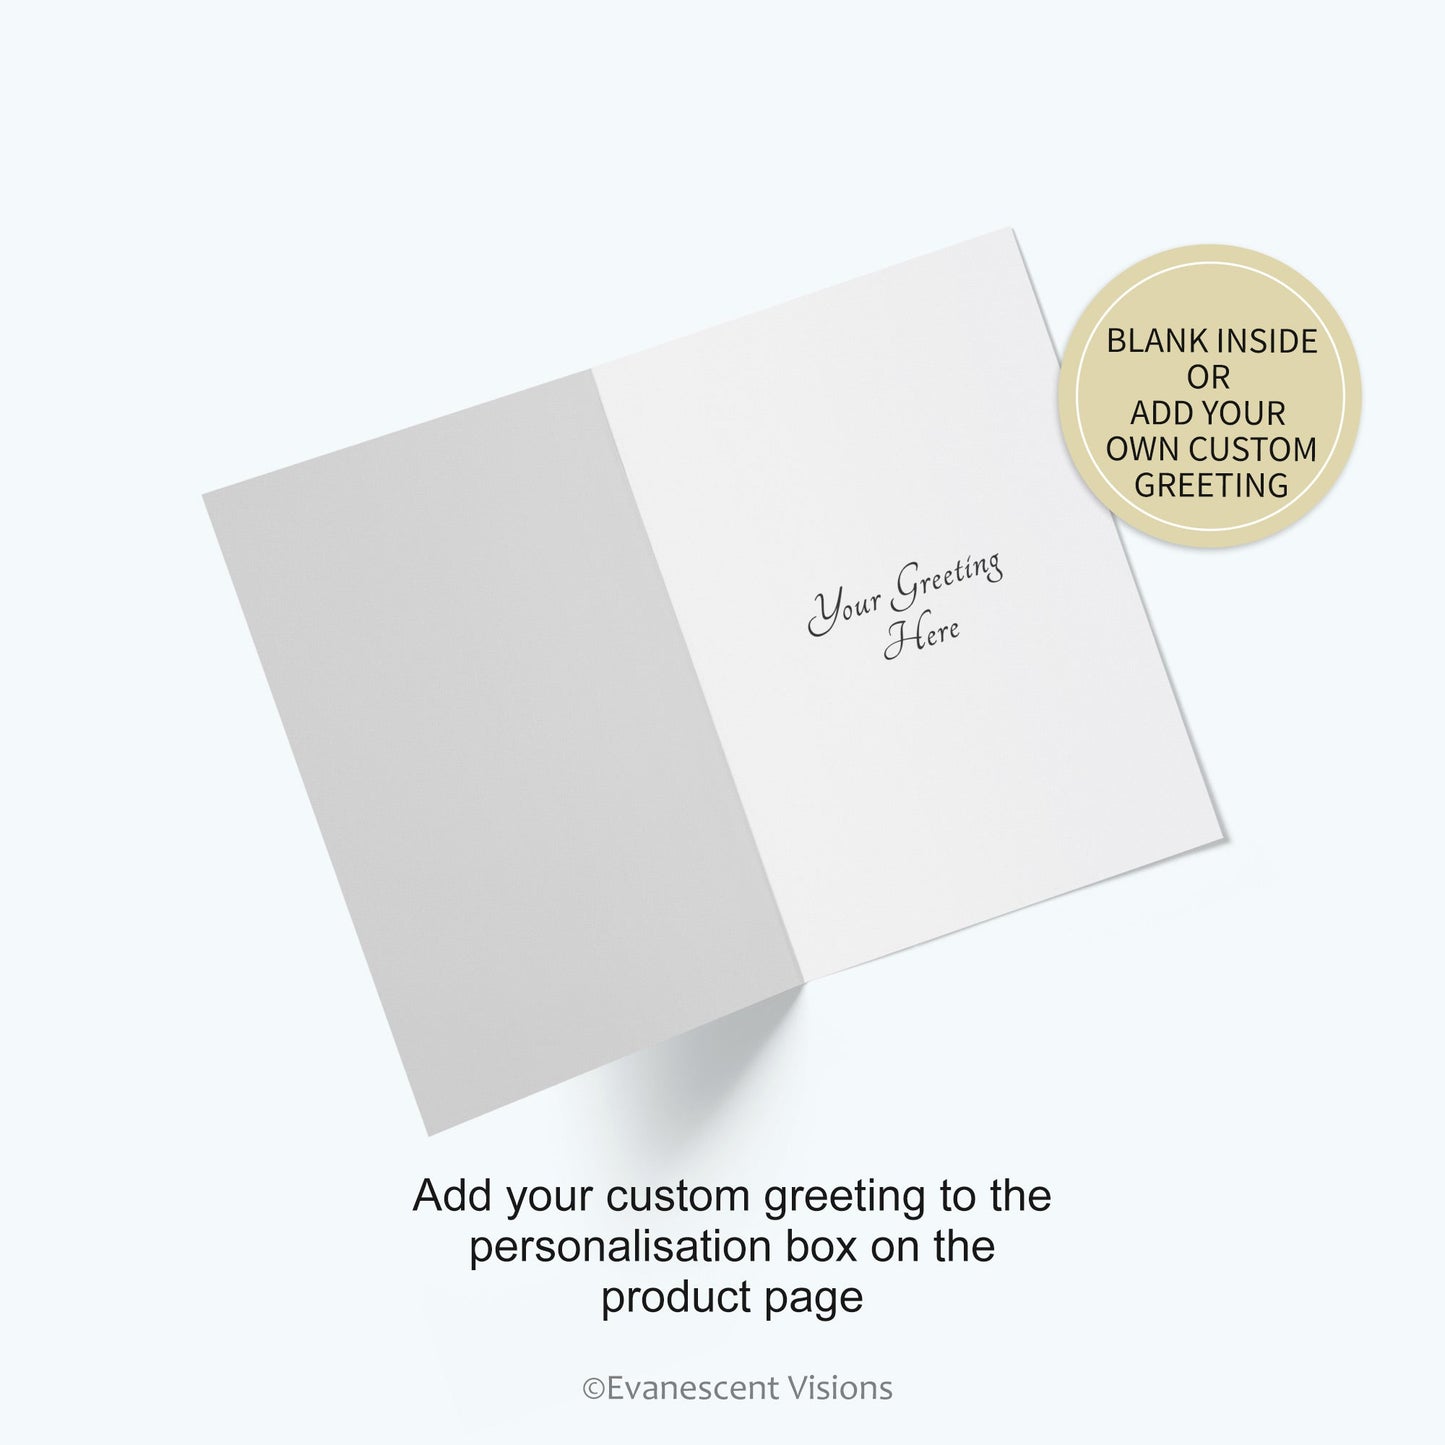 Inside card personalisation greeting example